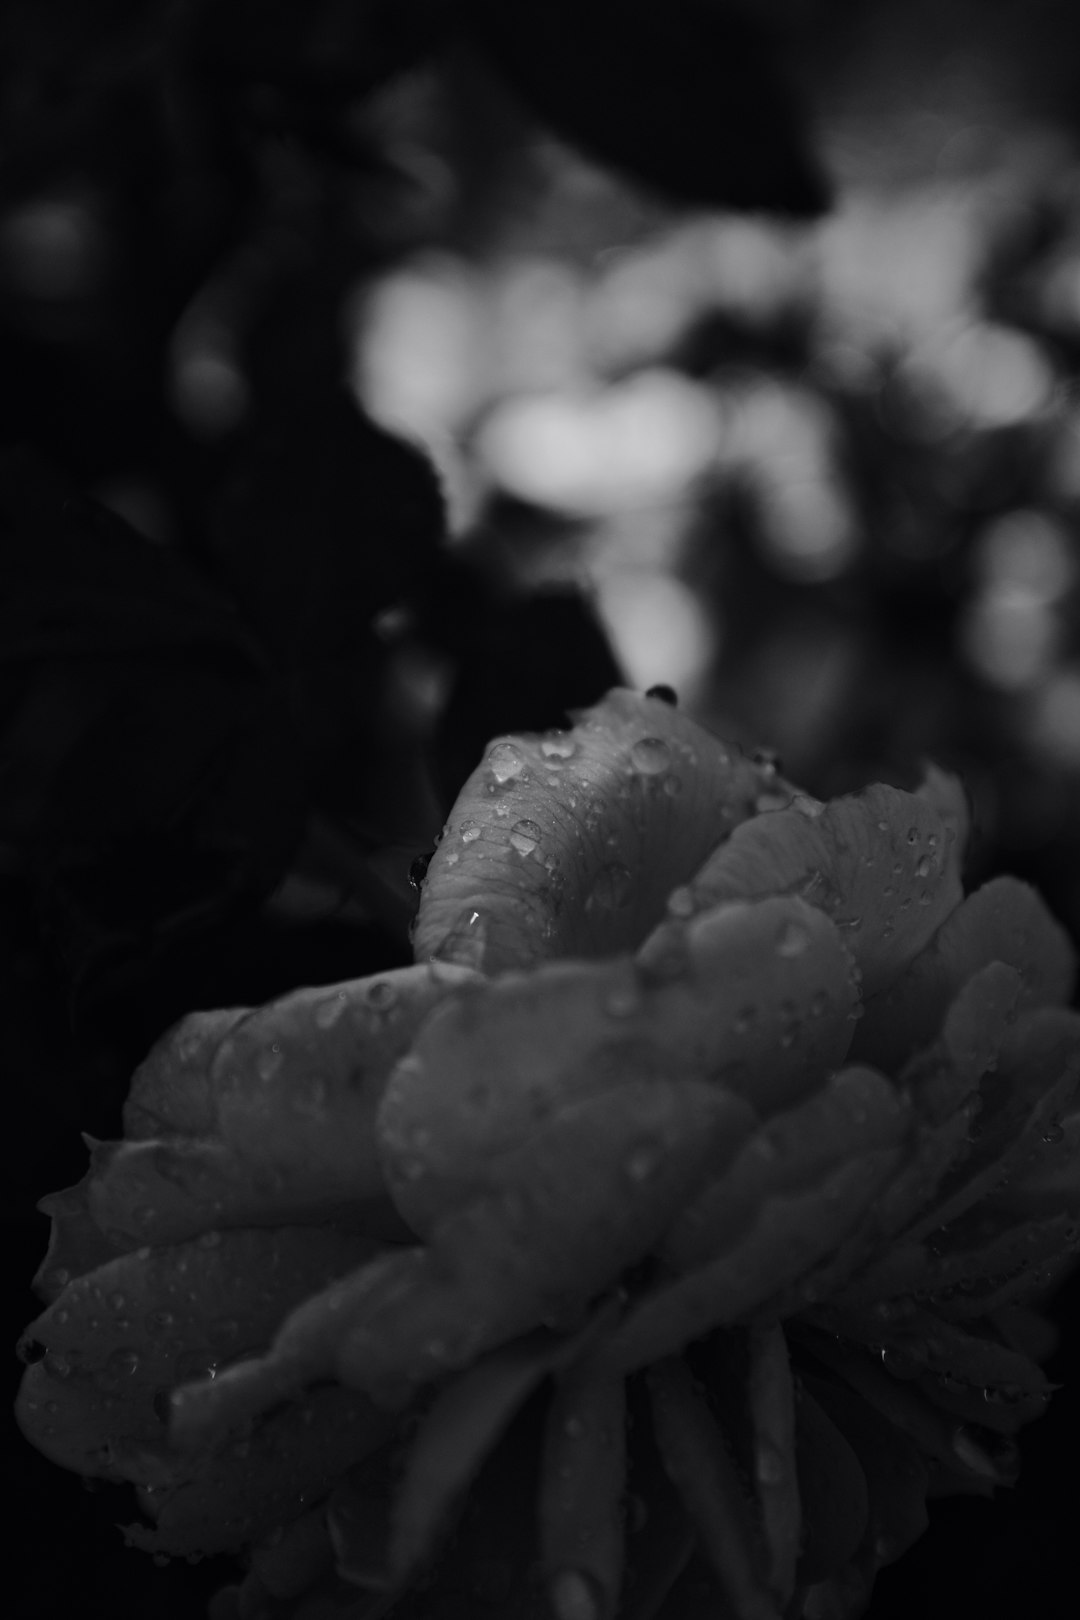 grayscale photo of rose with water droplets